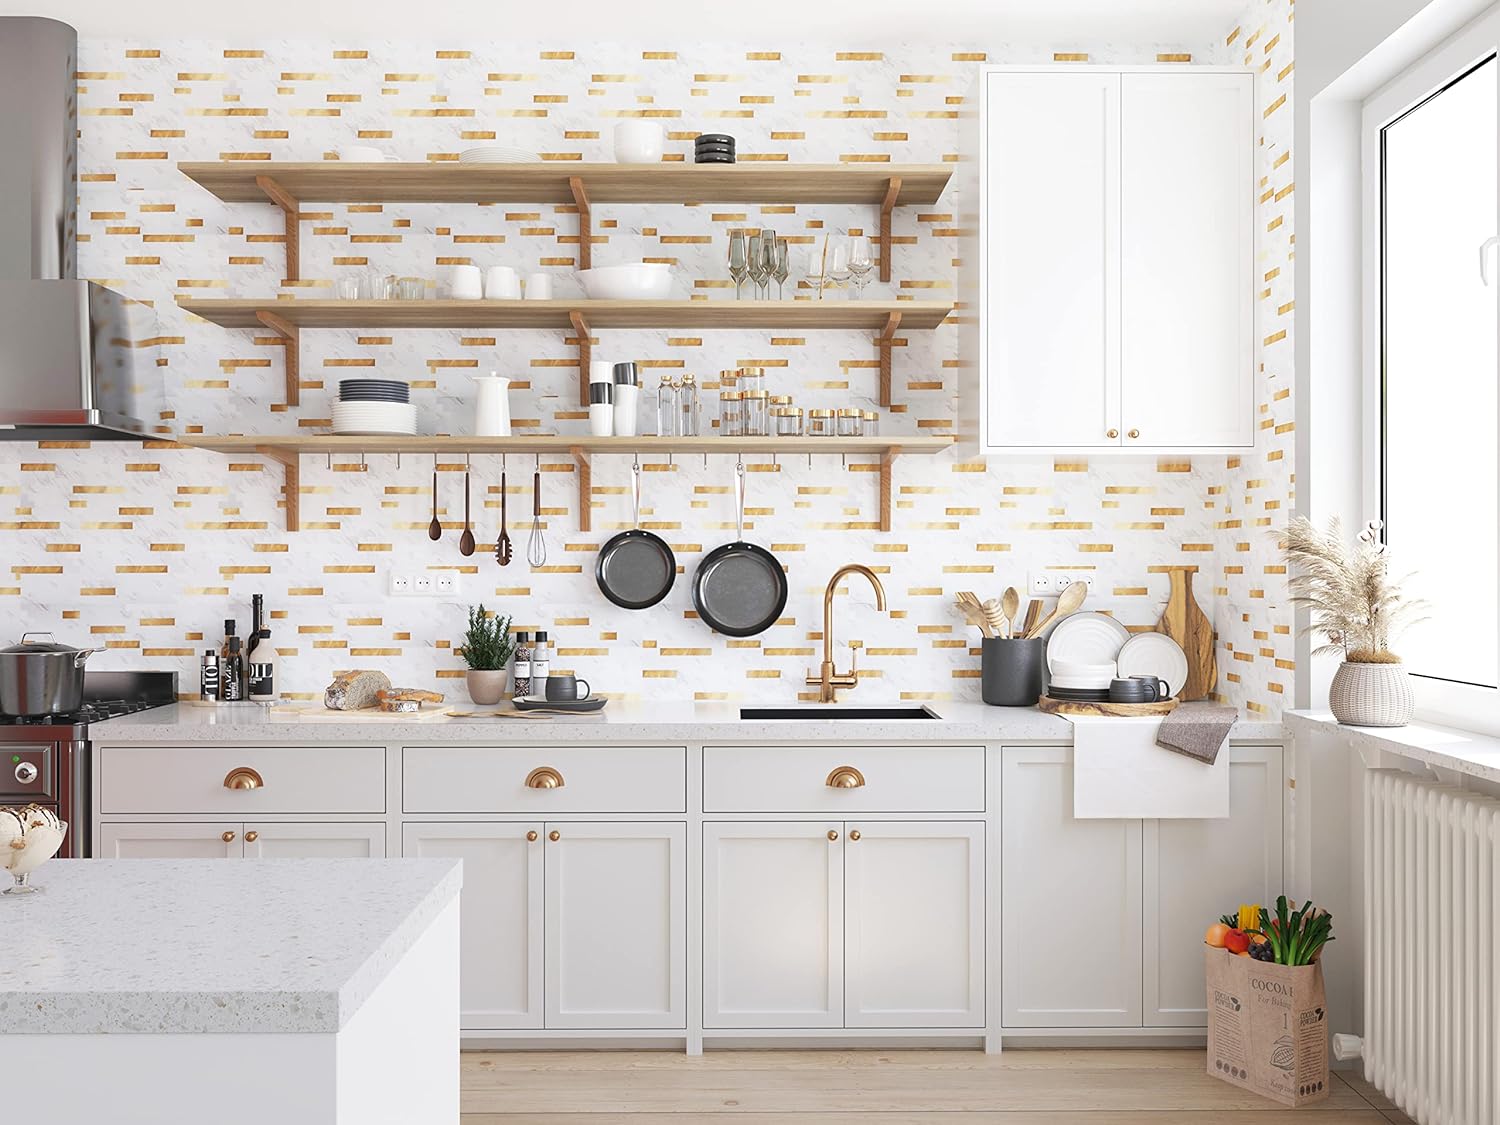 PVC backsplash ideas for kitchen Linear Blend in Carla with Gold